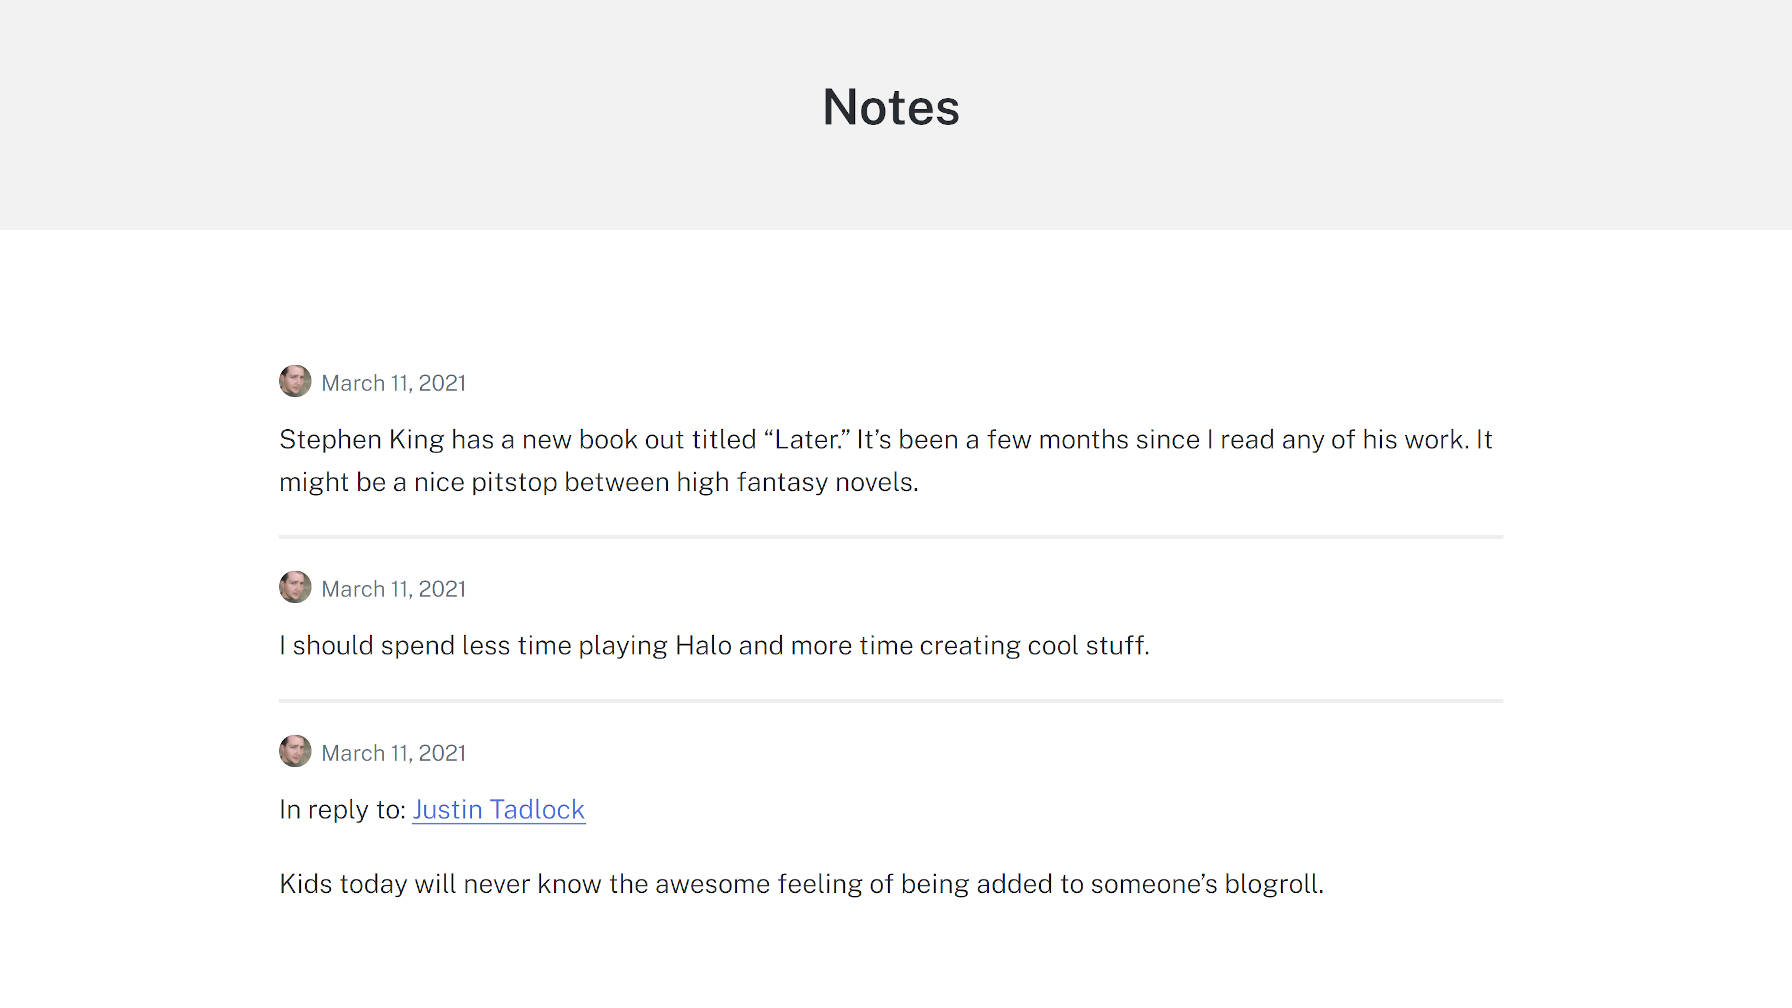 Archives view of notes from the Shortnotes plugin.